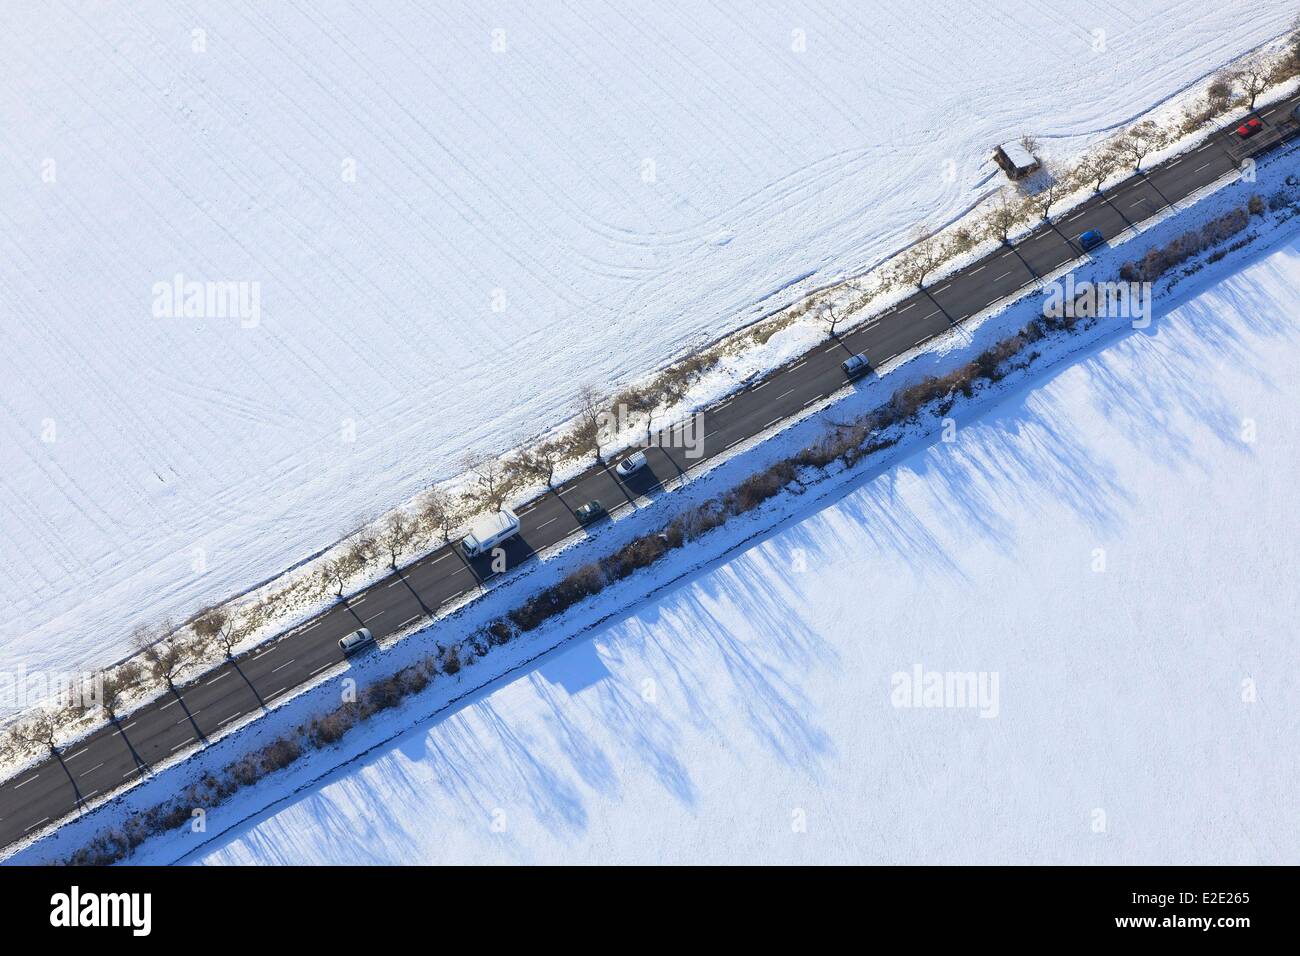 France Alpes de Haute Provence Les Mees secondary road network in the snow (aerial view) Stock Photo